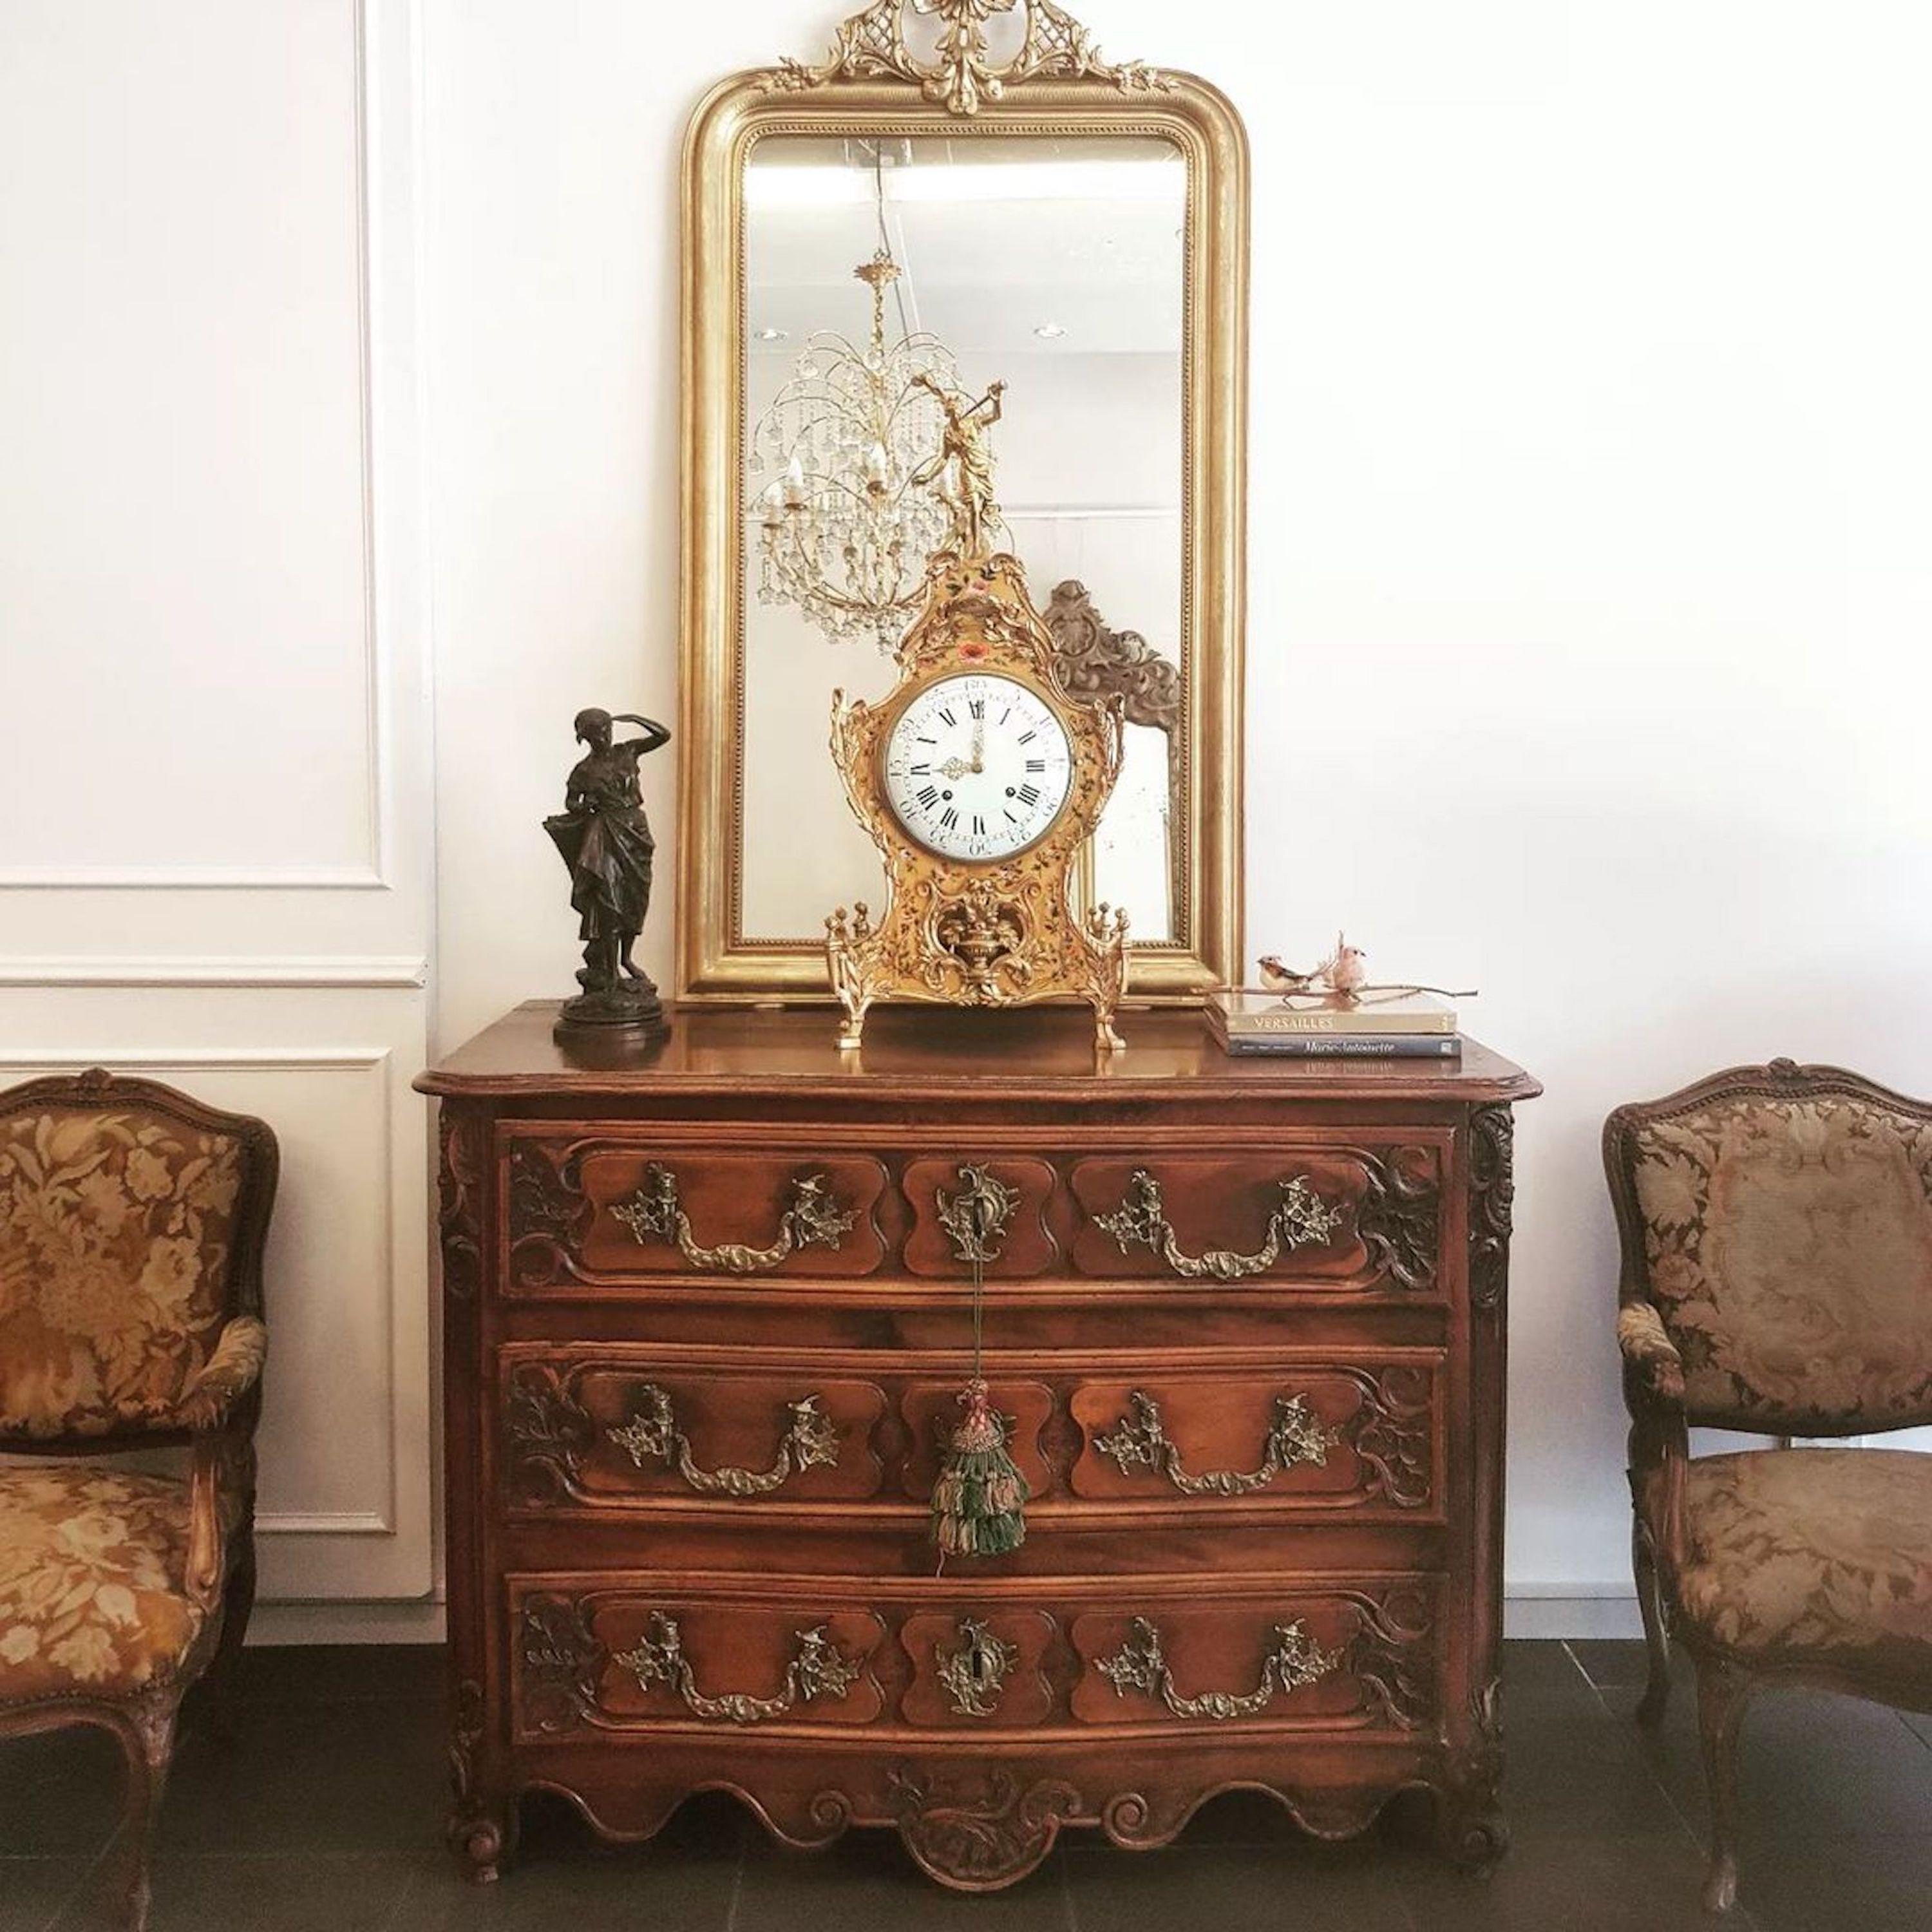 18th Century Late Régence / Early Louis XV Period Commode from Nîmes Provence, France.

Of substance and presence this exceptional chest of drawers has very generous dimensions and is made of solid wood from Walnut. Its original plank walnut top